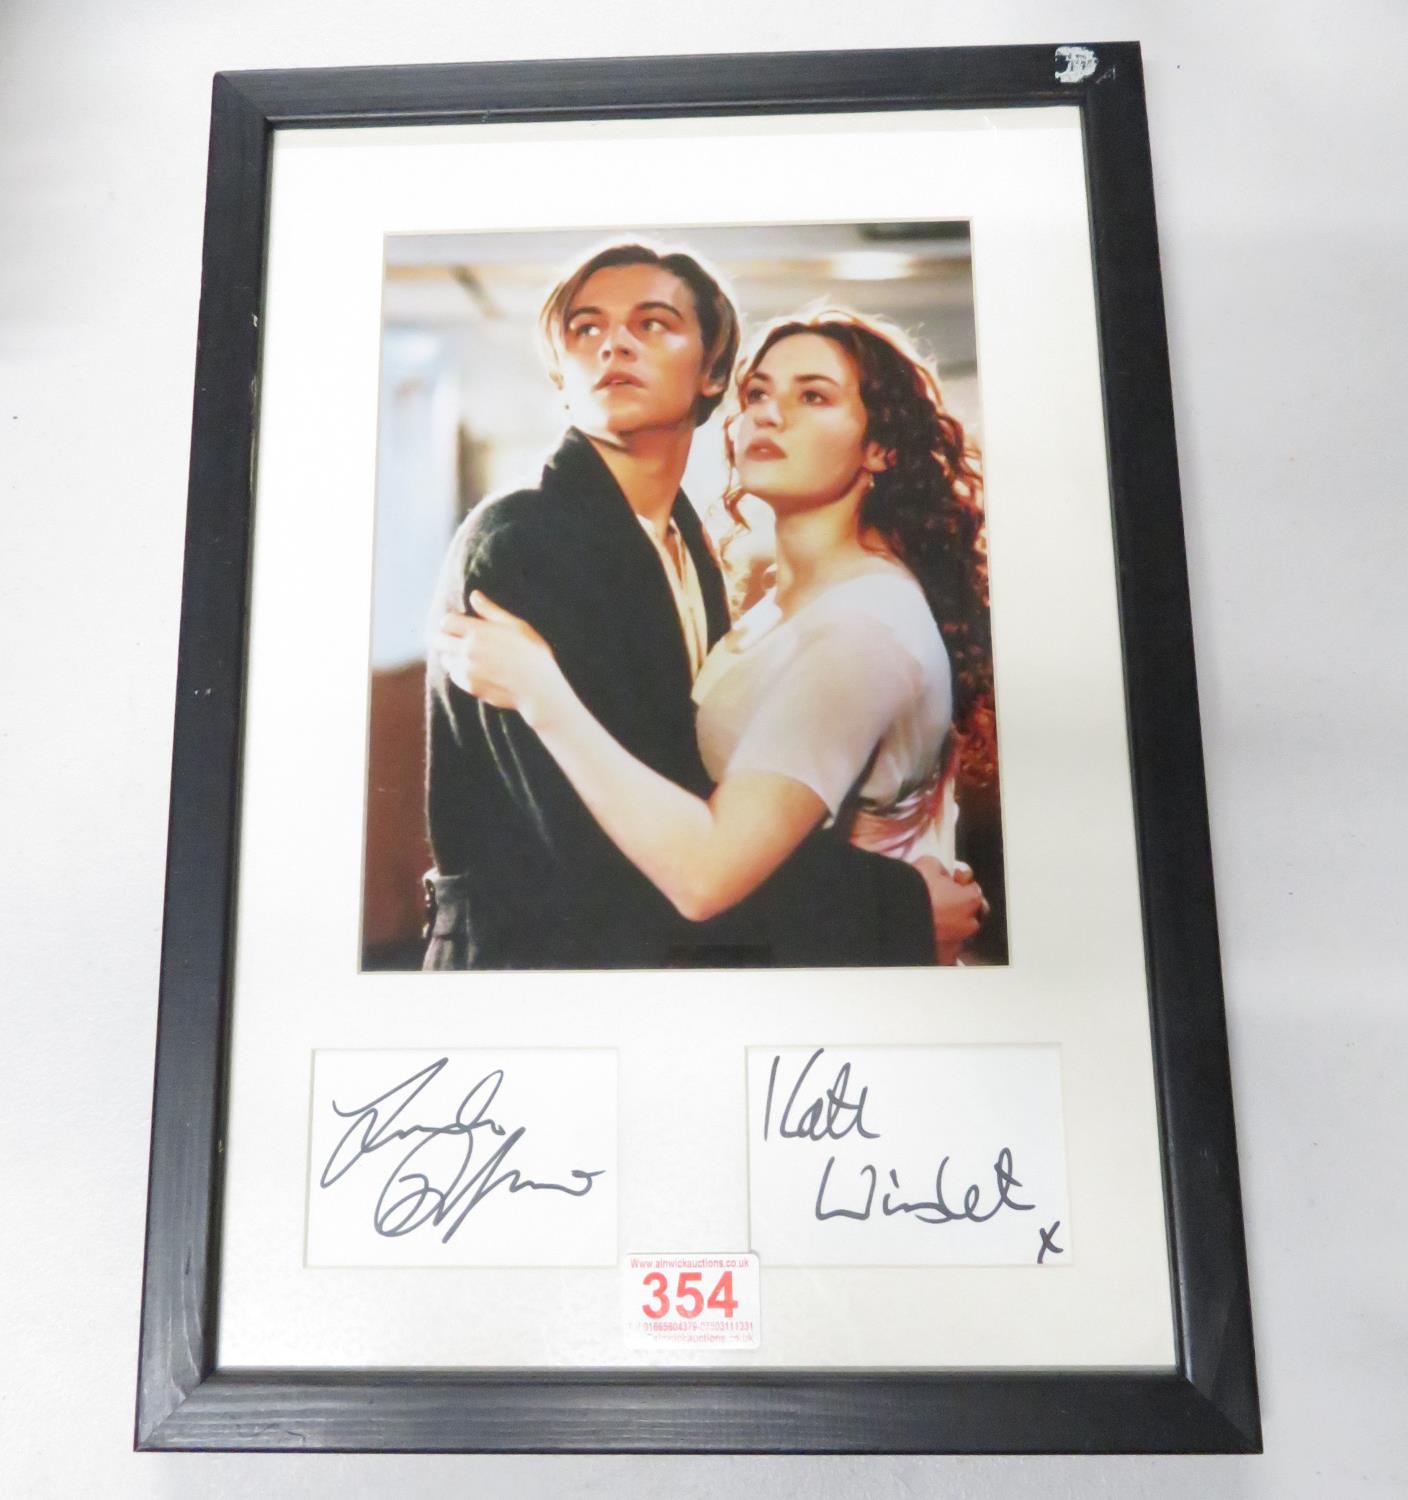 Leonardo Di Caprio and Kate Winslet autographed photo from Titanic framed